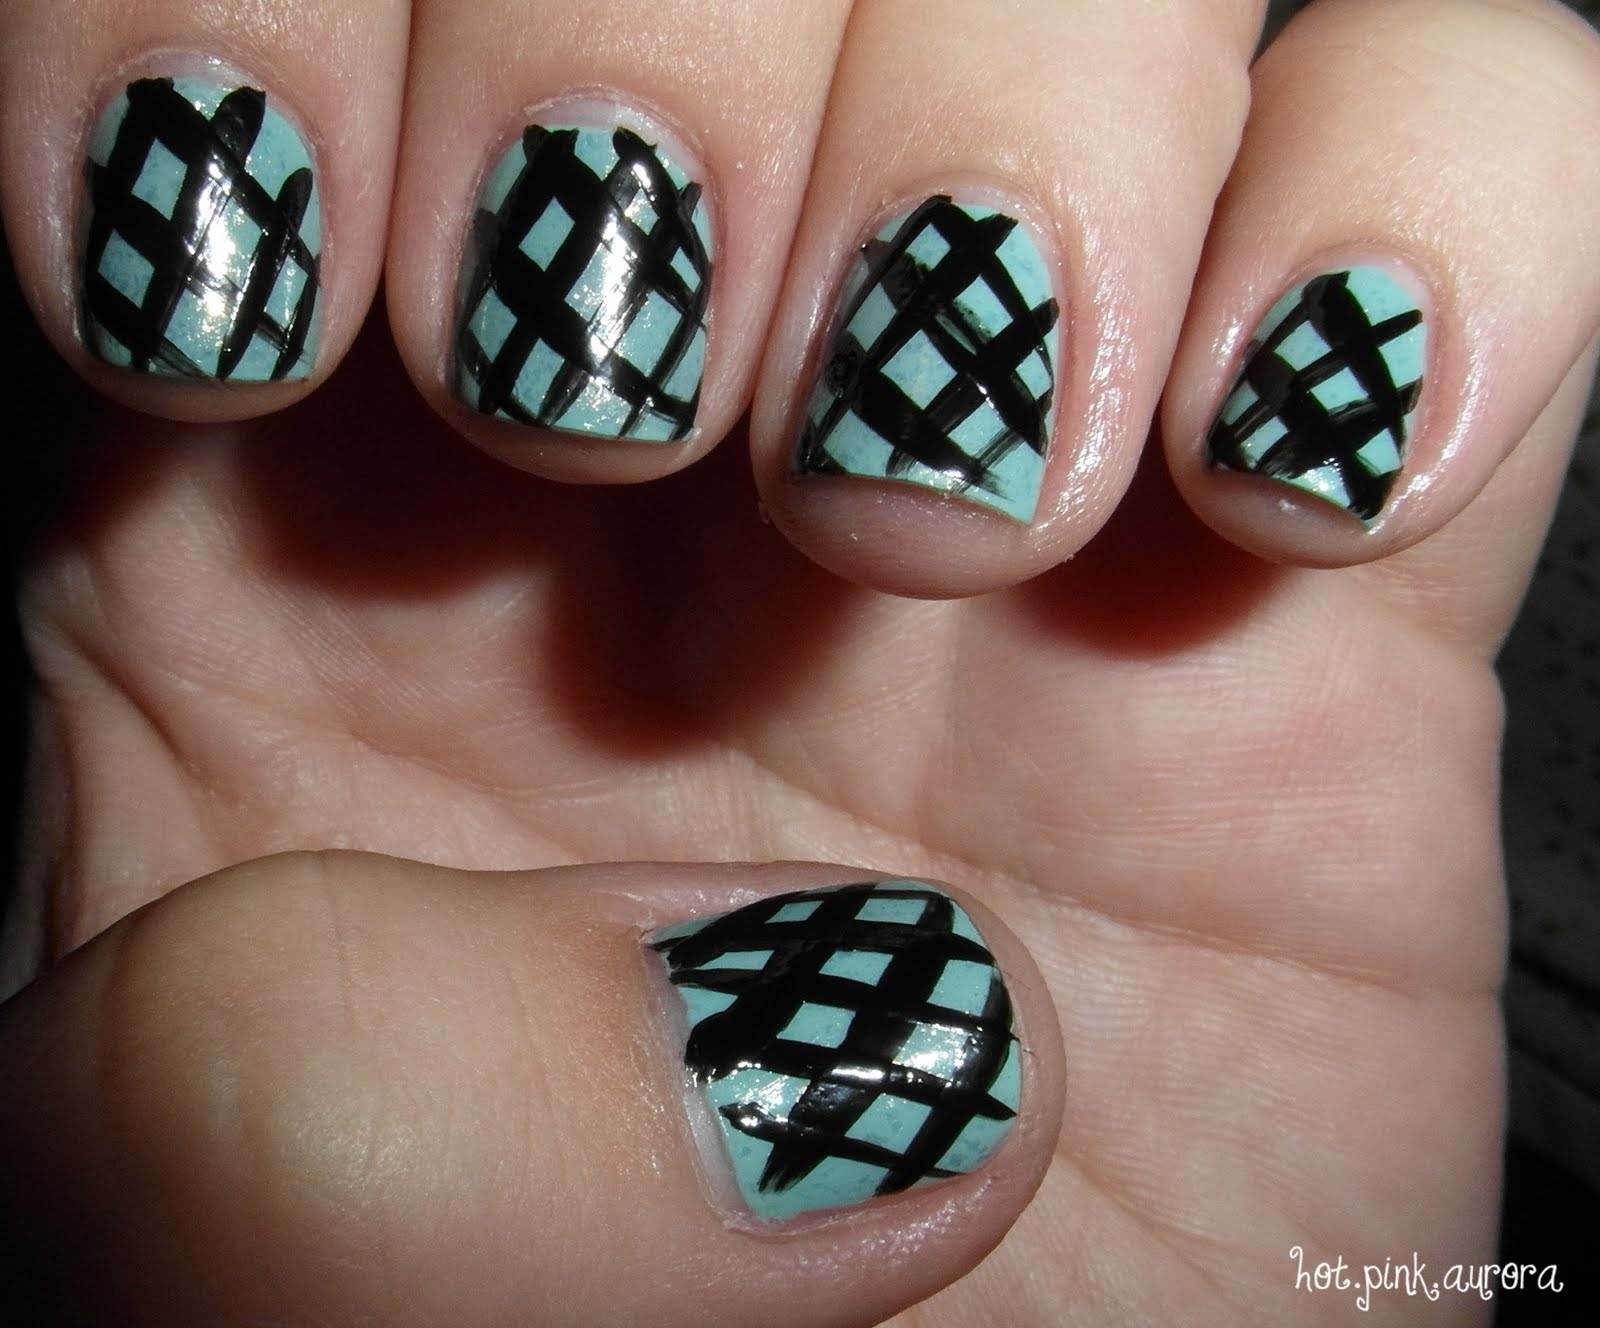 Lattice Nail Art Tutorial with Stamping - wide 8